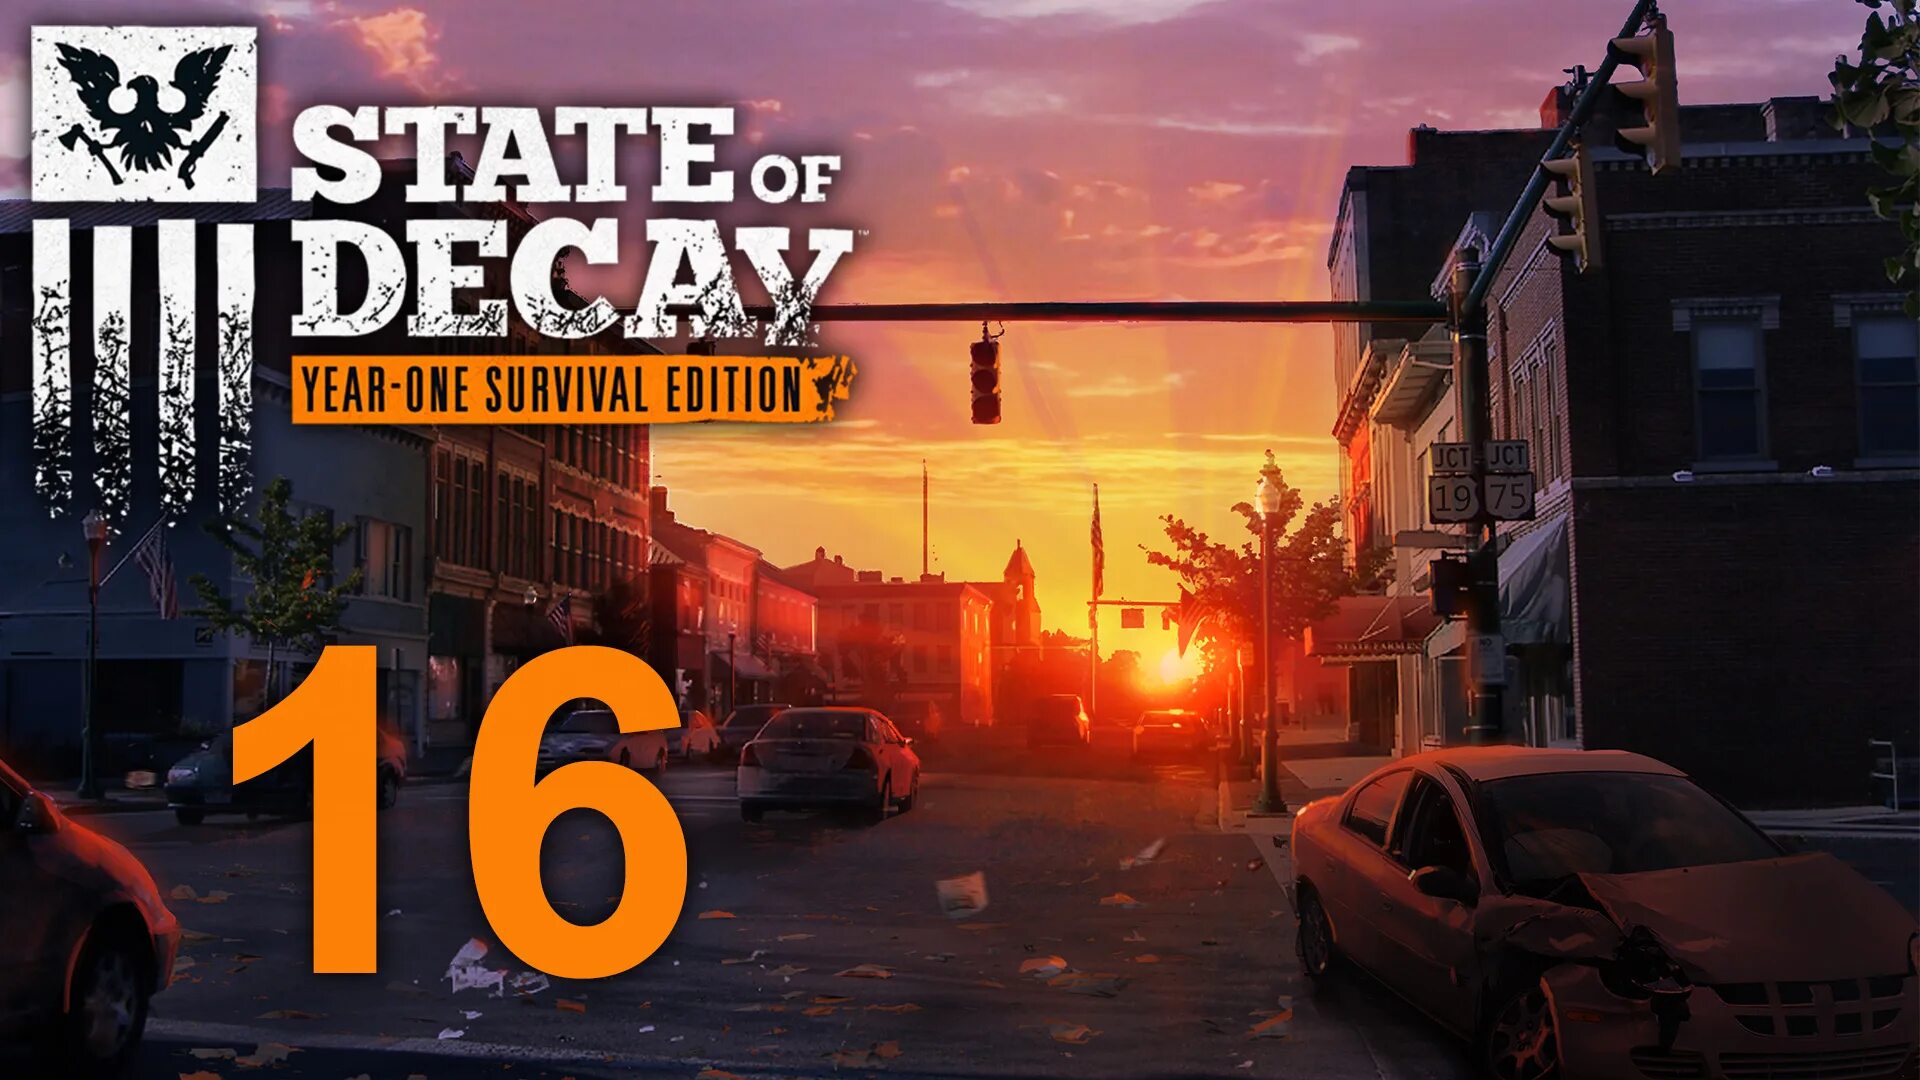 Прохождение state. State of Decay прохождение. State of Decay 1 прохождение. State of Decay прохождение на русском. State of Decay yose - Day one Edition.